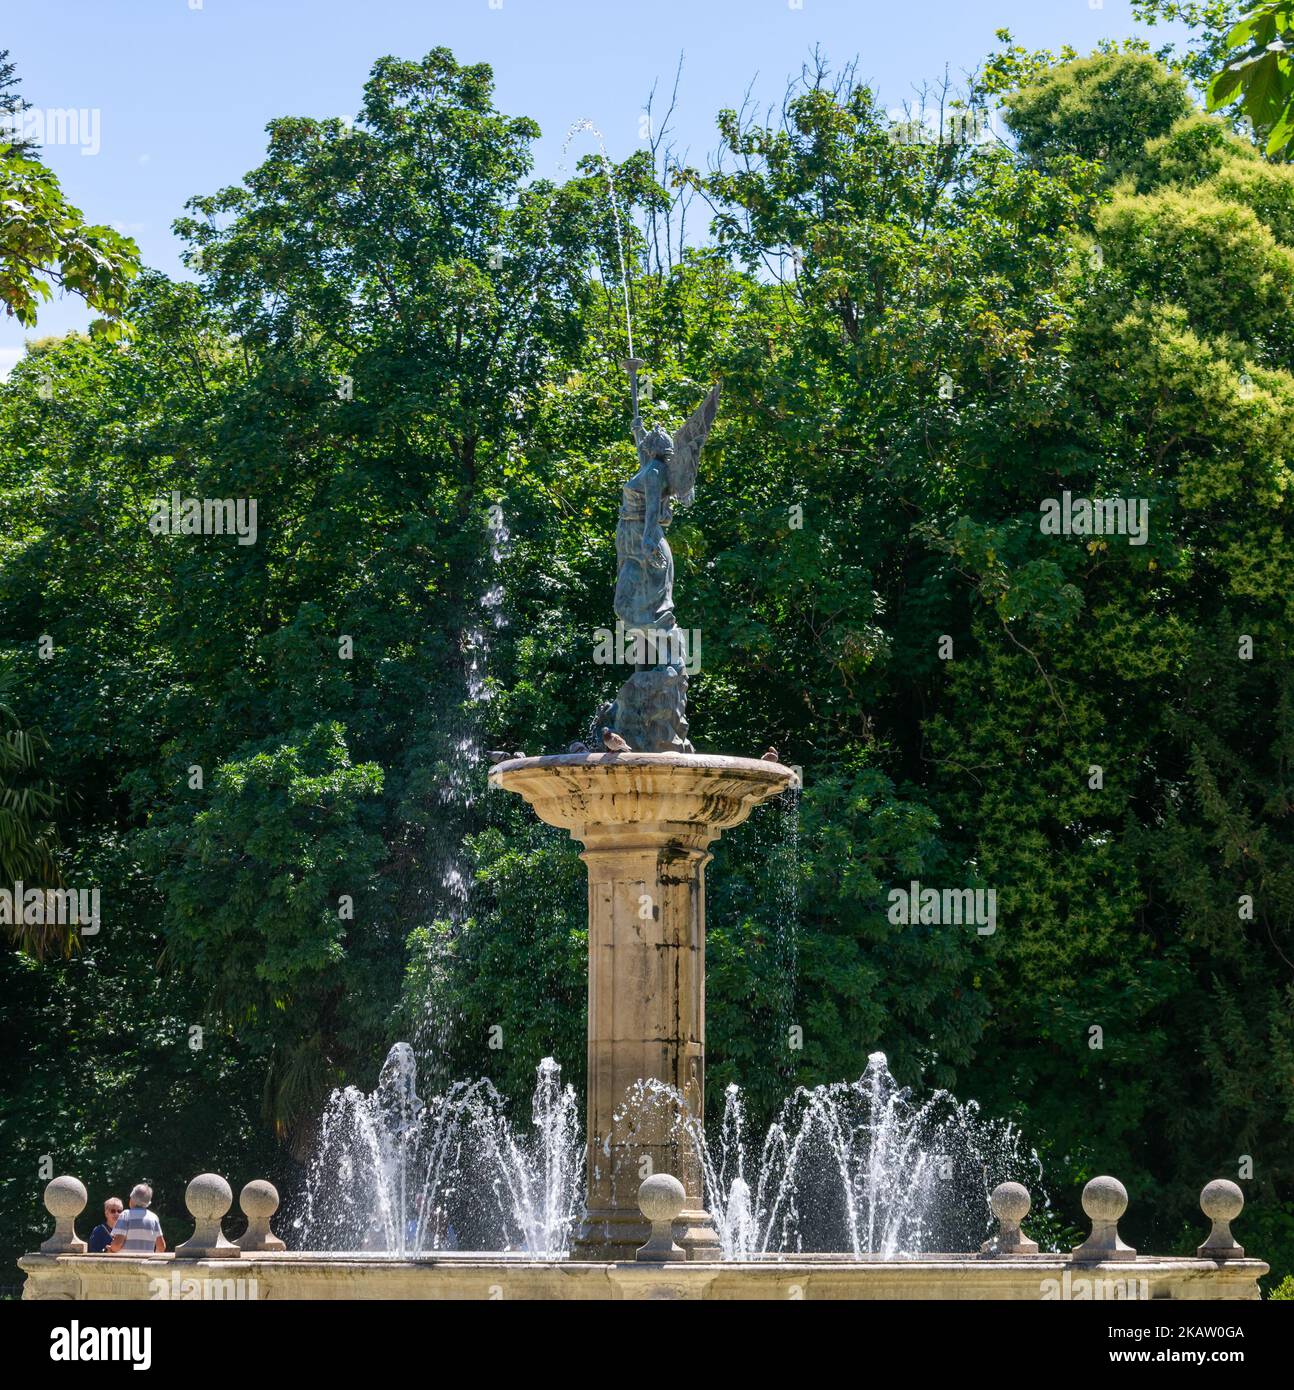 An angel blowing a trumpet figure in a water fountain in a park Stock Photo